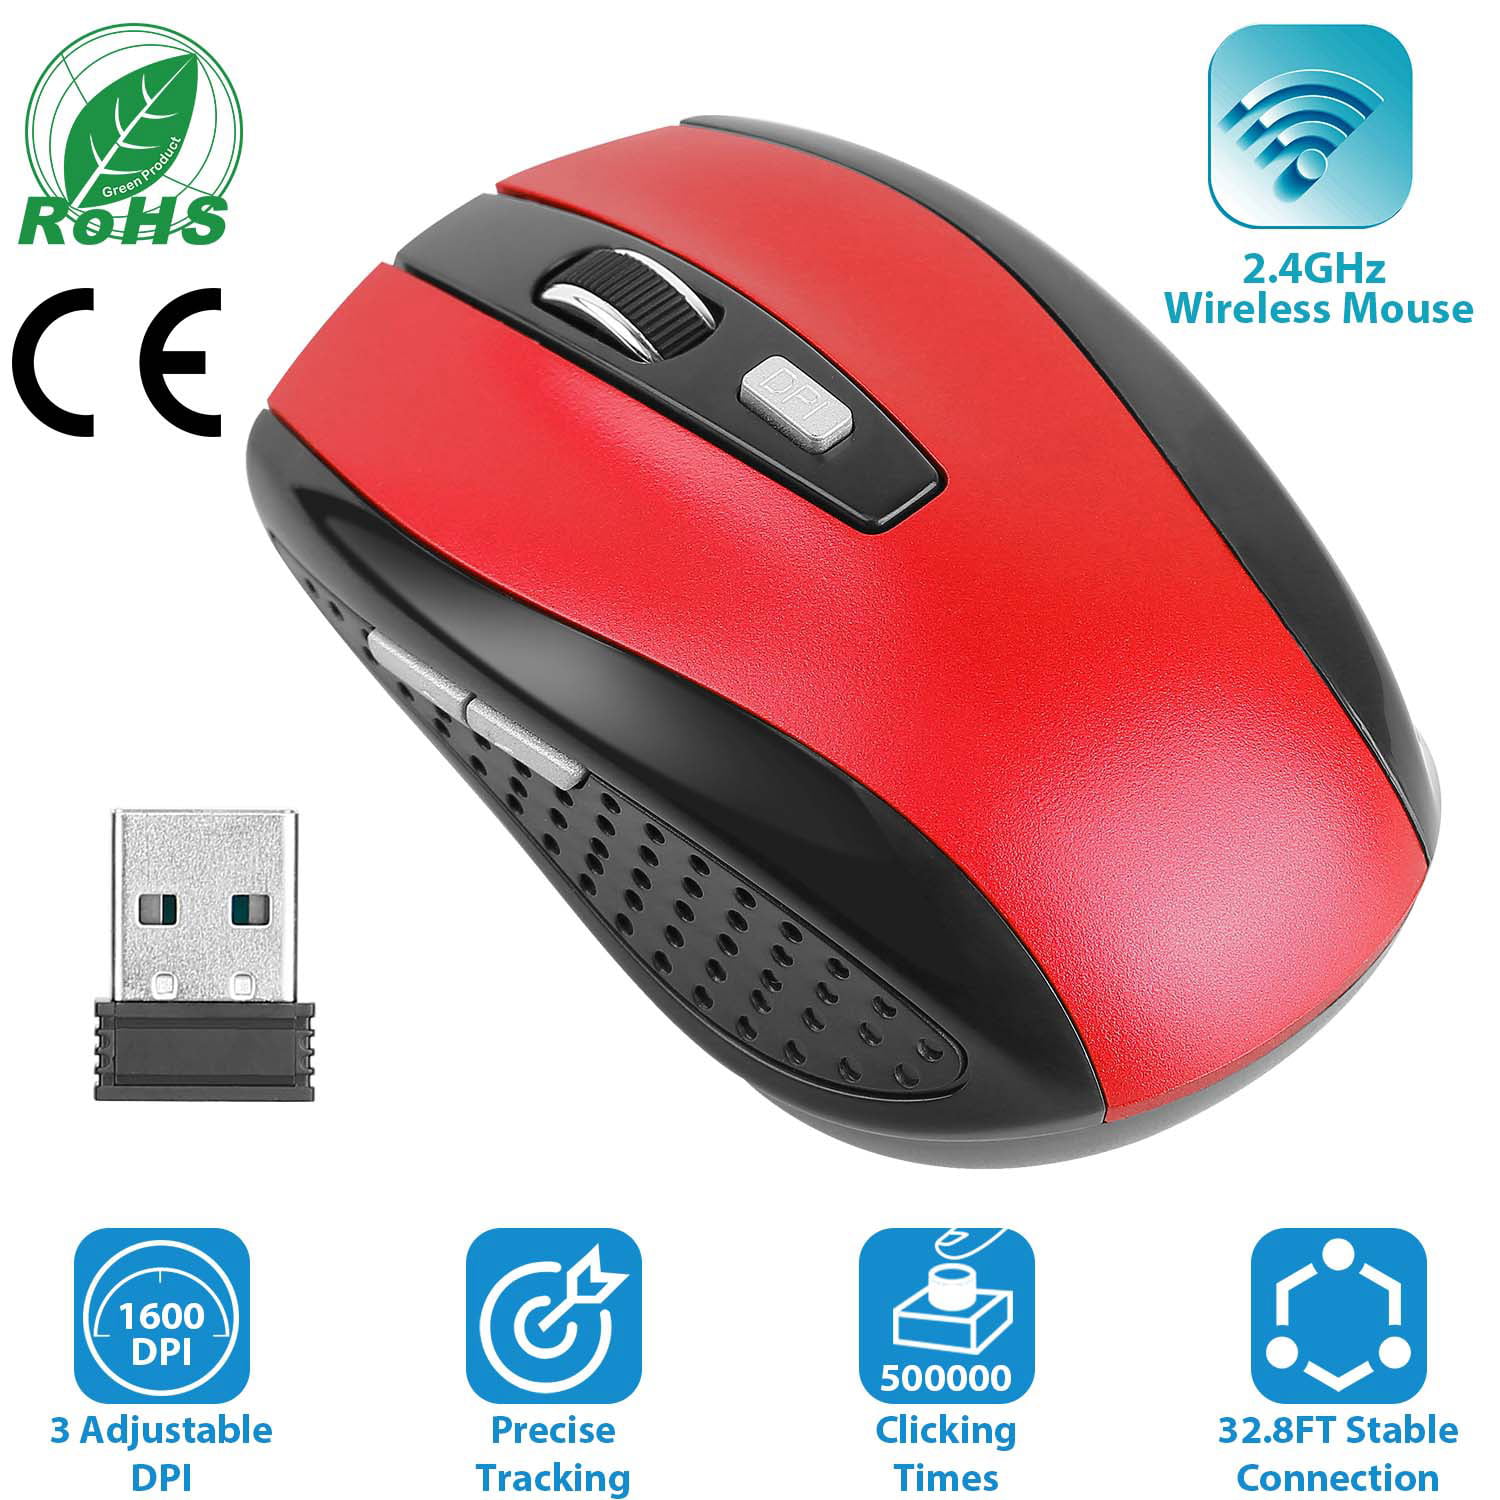 2.4 GHz Wireless Gaming Mouse Portable USB Optical Mice For PC Laptop Computer 